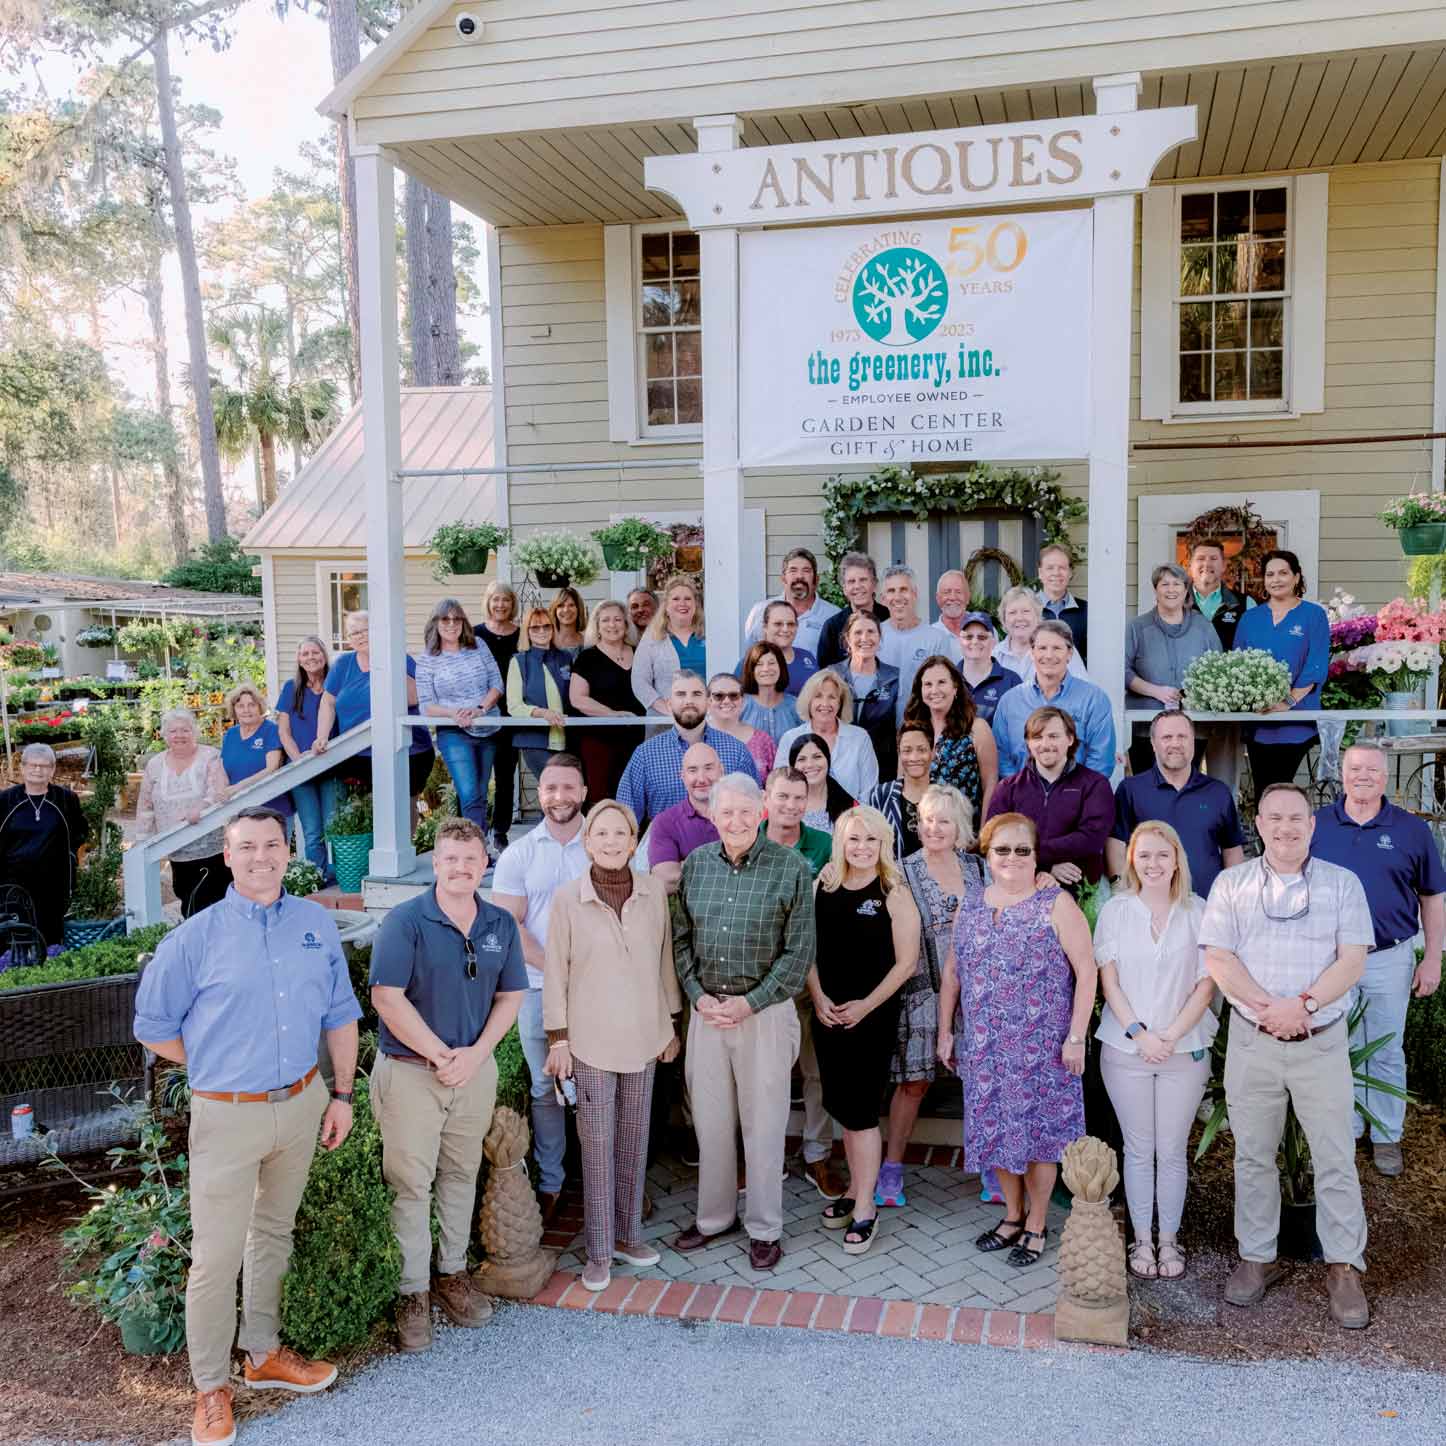 How a business can survive 50 years on Hilton Head Island